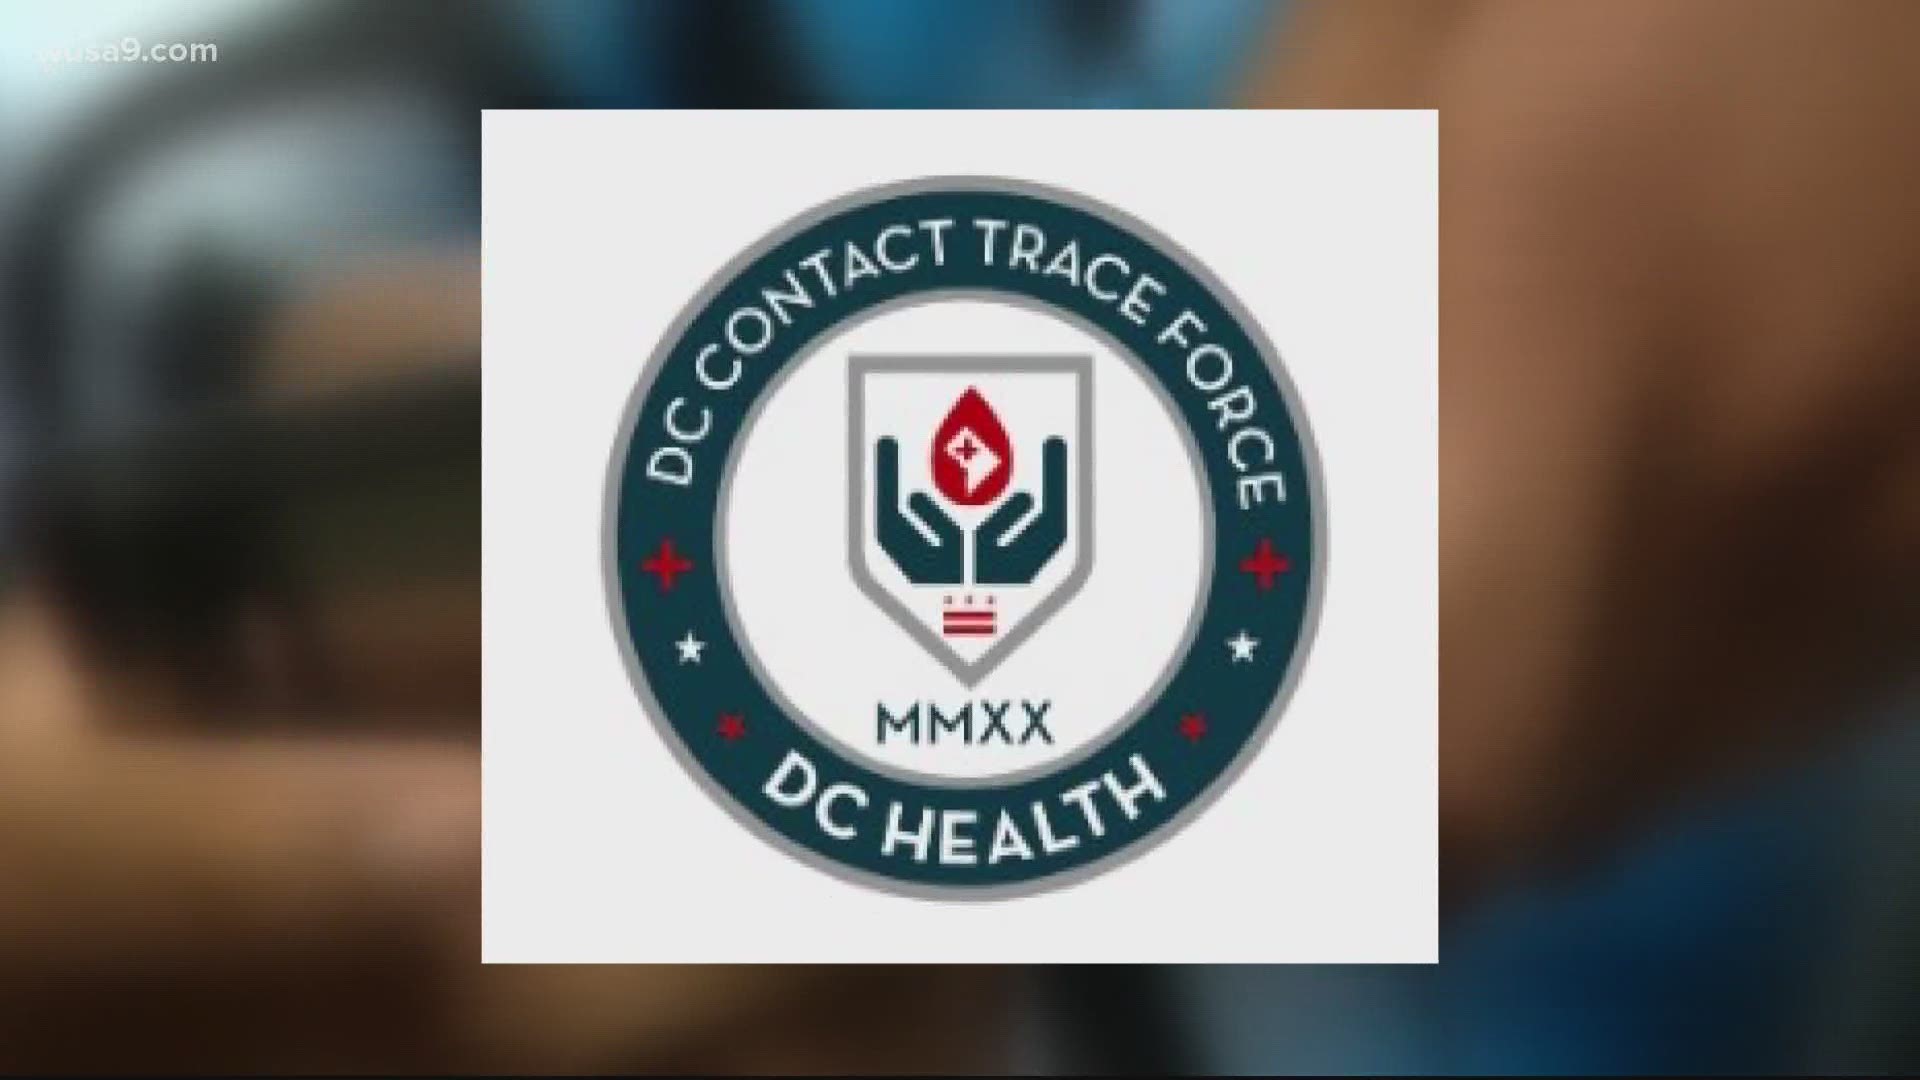 City leaders plan to hire at least 200 additional members to DC's Contact Trace Force, which aims to reduce the spread of coronavirus.